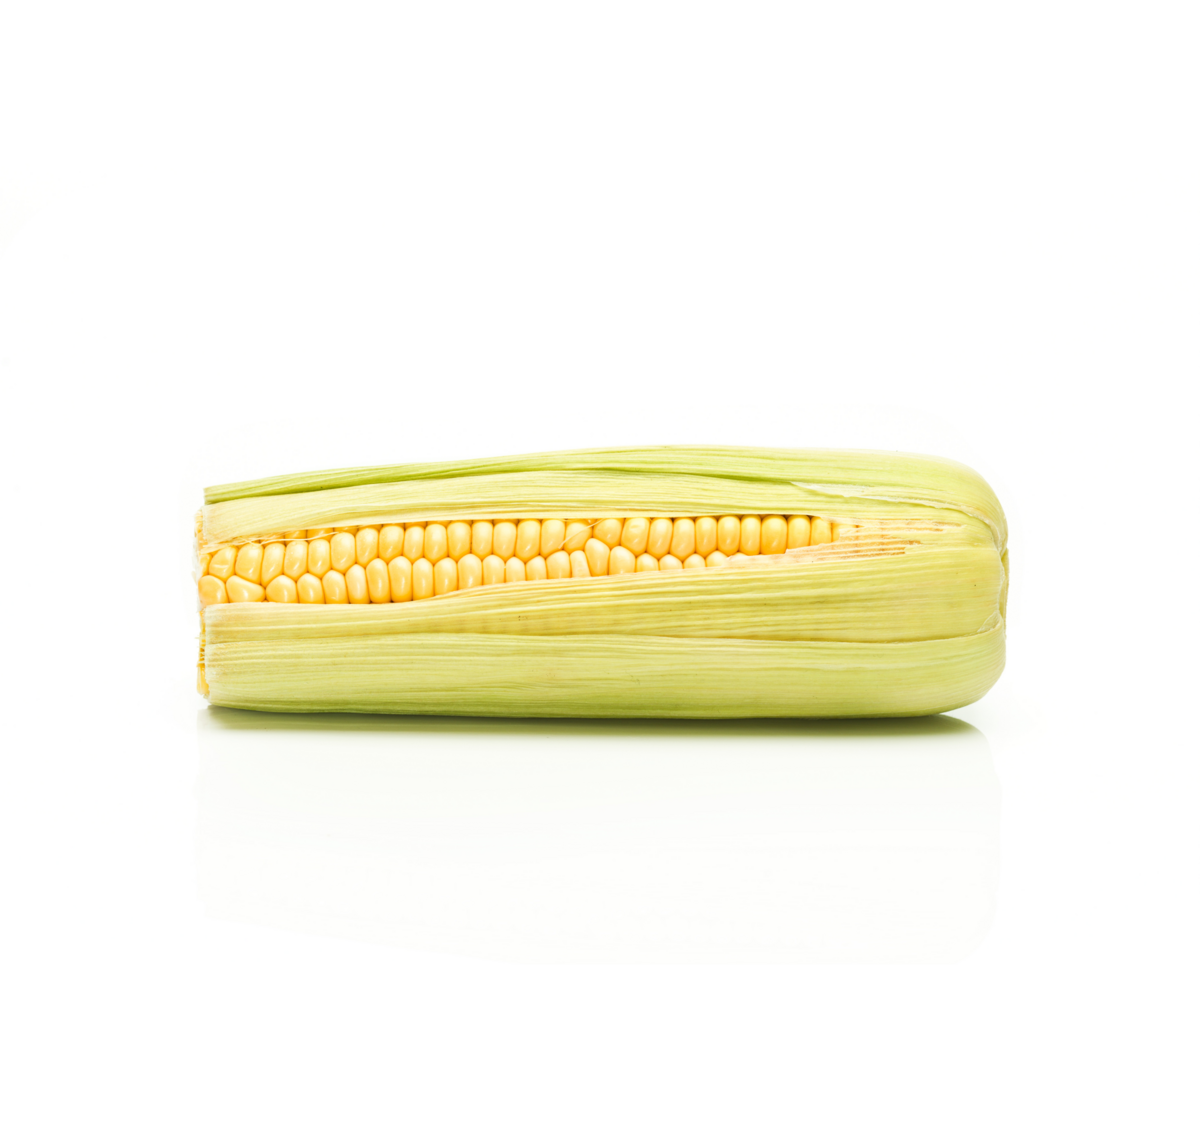 Sweetcorn cultivation for the best quality sweetcorn